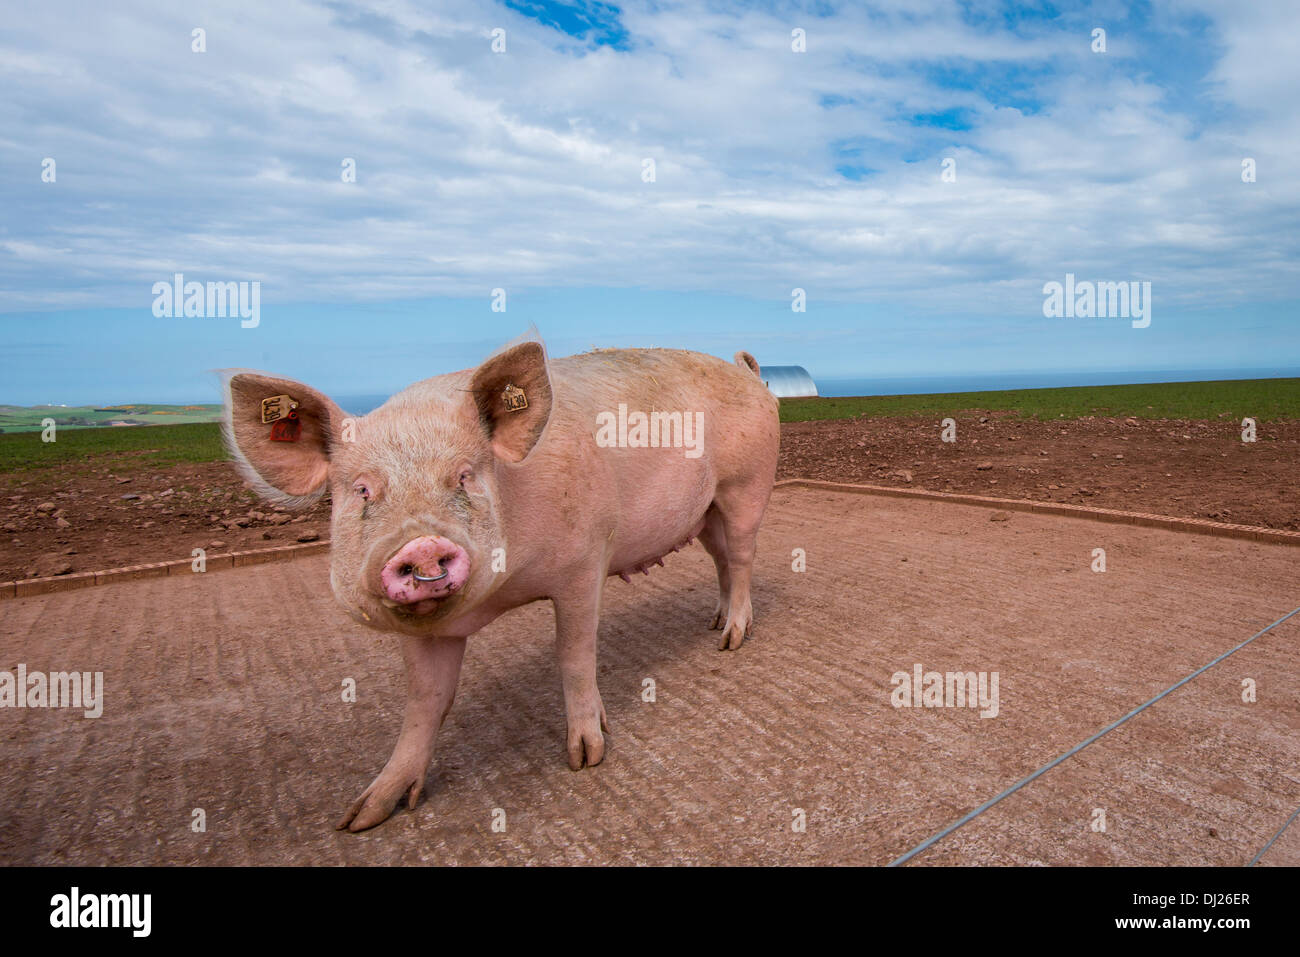 Pig with nose ring Stock Photo